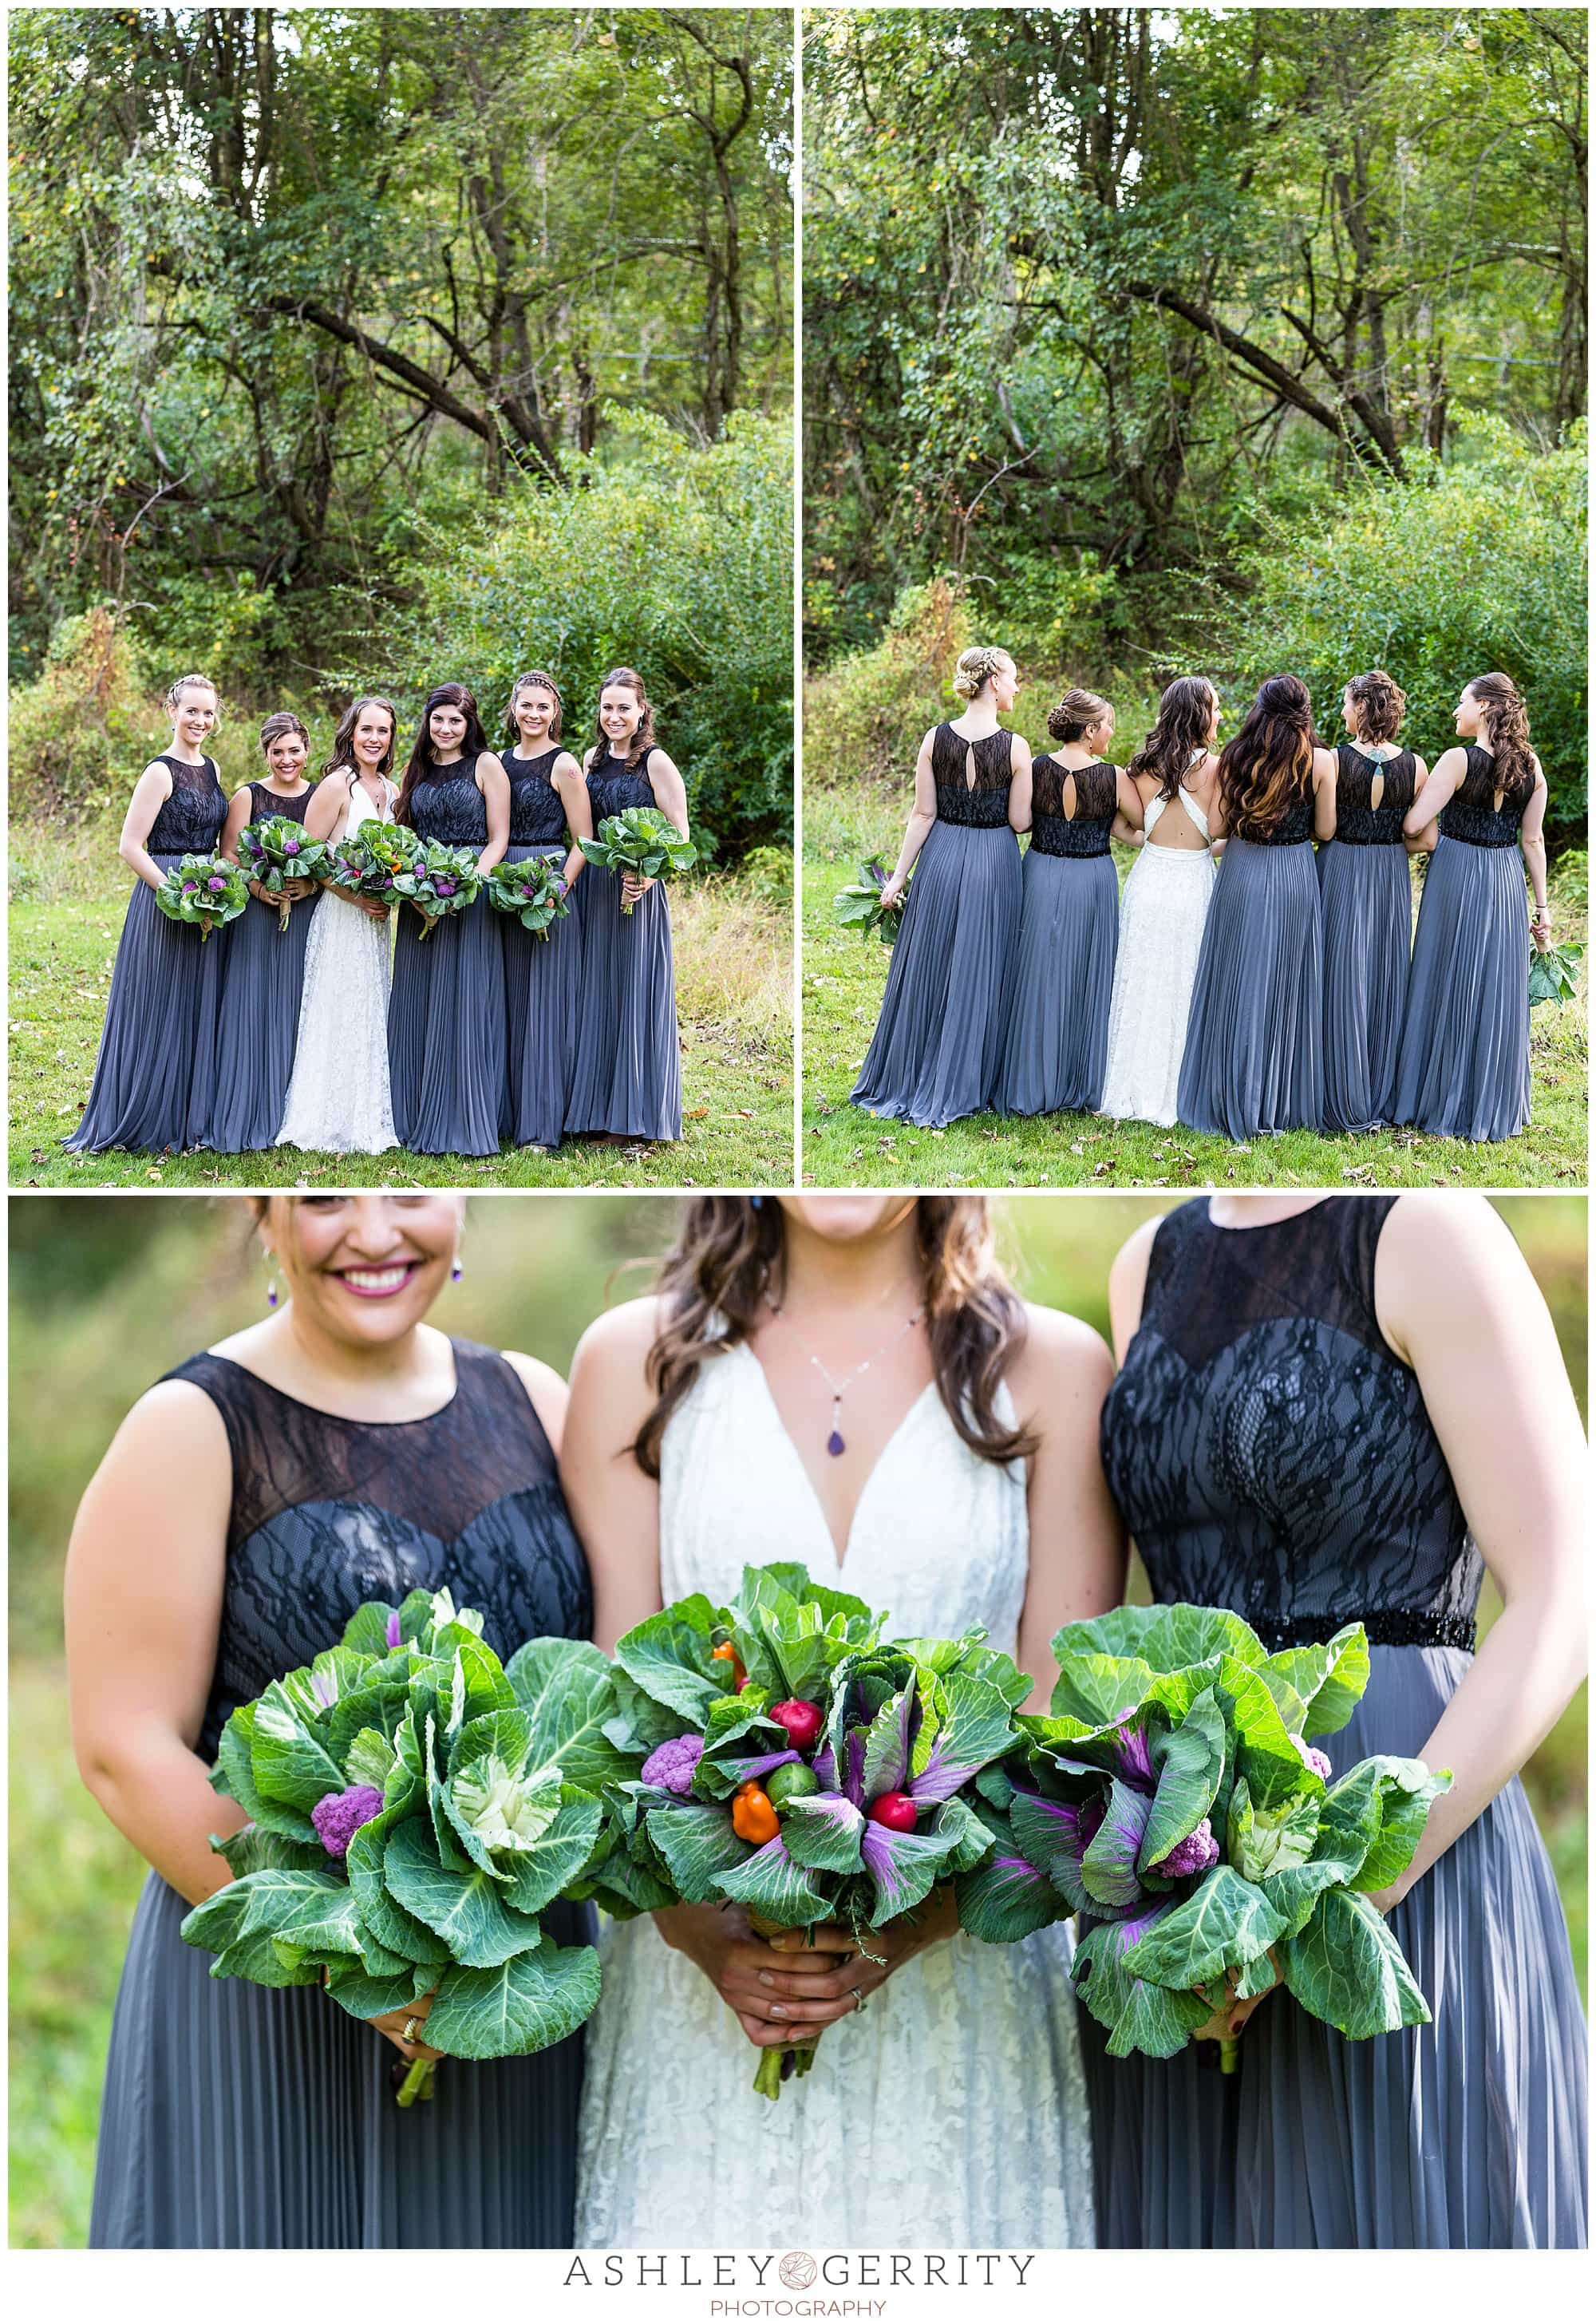 Bride &amp; her wedding party, bridemaids in deep periwinkle full length gowns, carrying vegetable bouquets